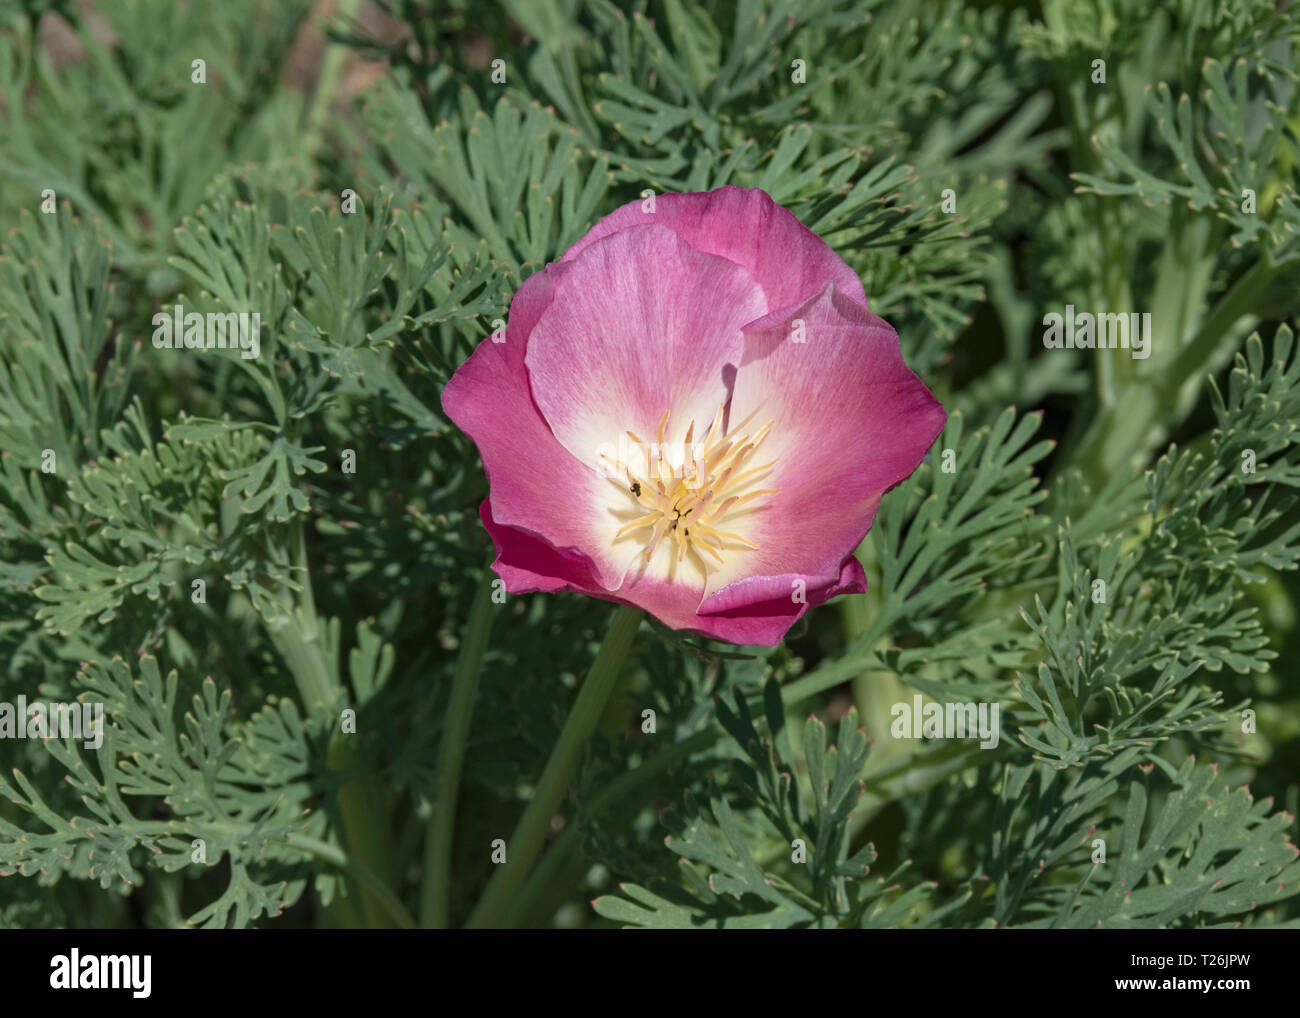 a magenta dark pink california poppy fully open above a lush display of the plant's leaves growing in a home garden Stock Photo